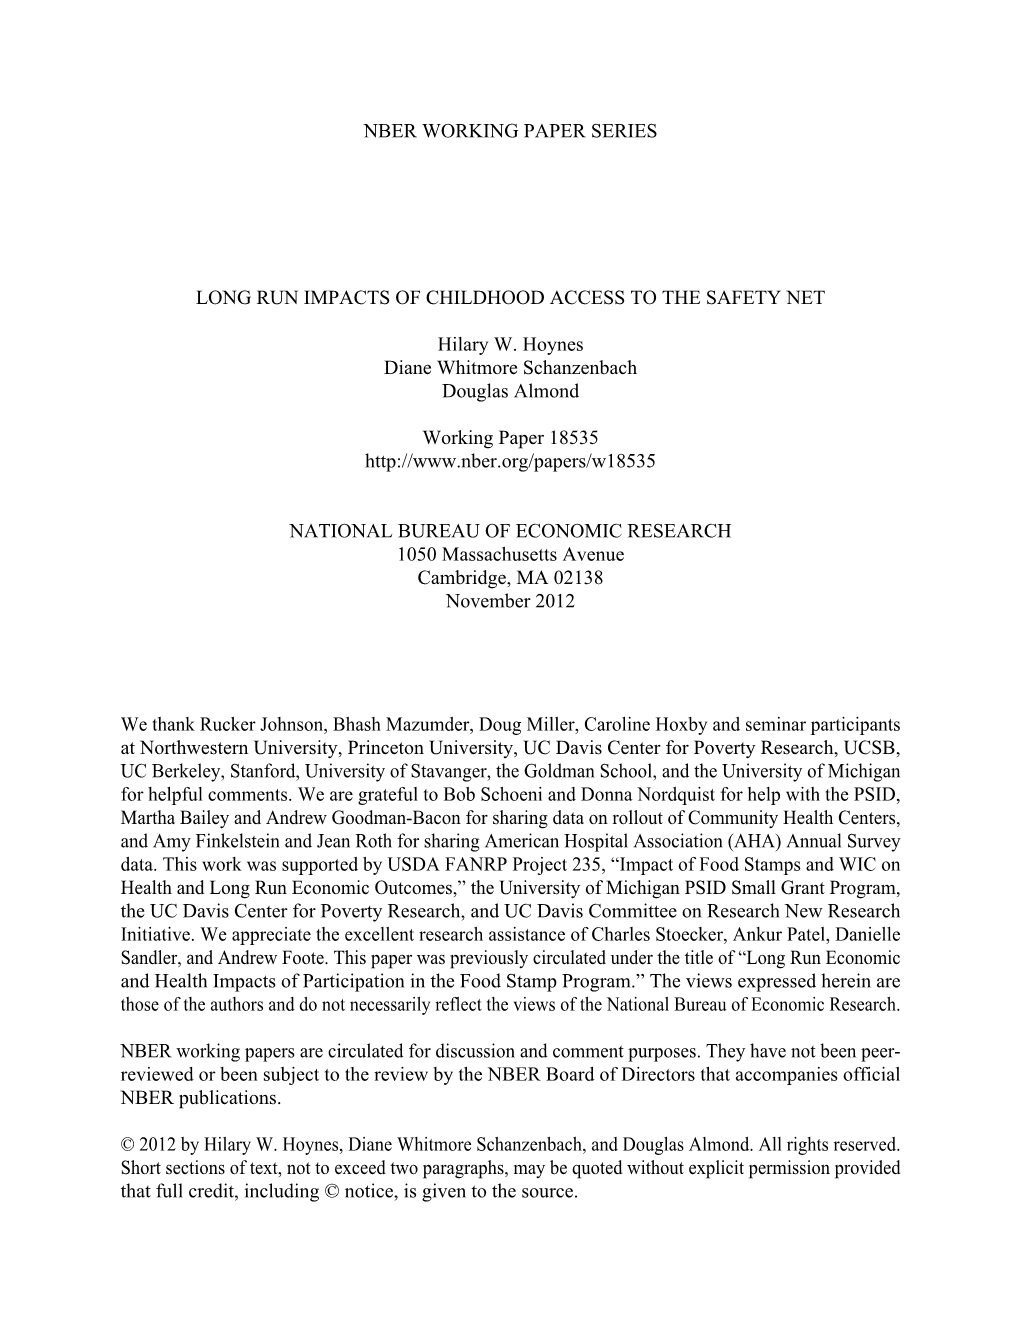 NBER WORKING PAPER SERIES LONG RUN IMPACTS of CHILDHOOD ACCESS to the SAFETY NET Hilary W. Hoynes Diane Whitmore Schanzenbach Do